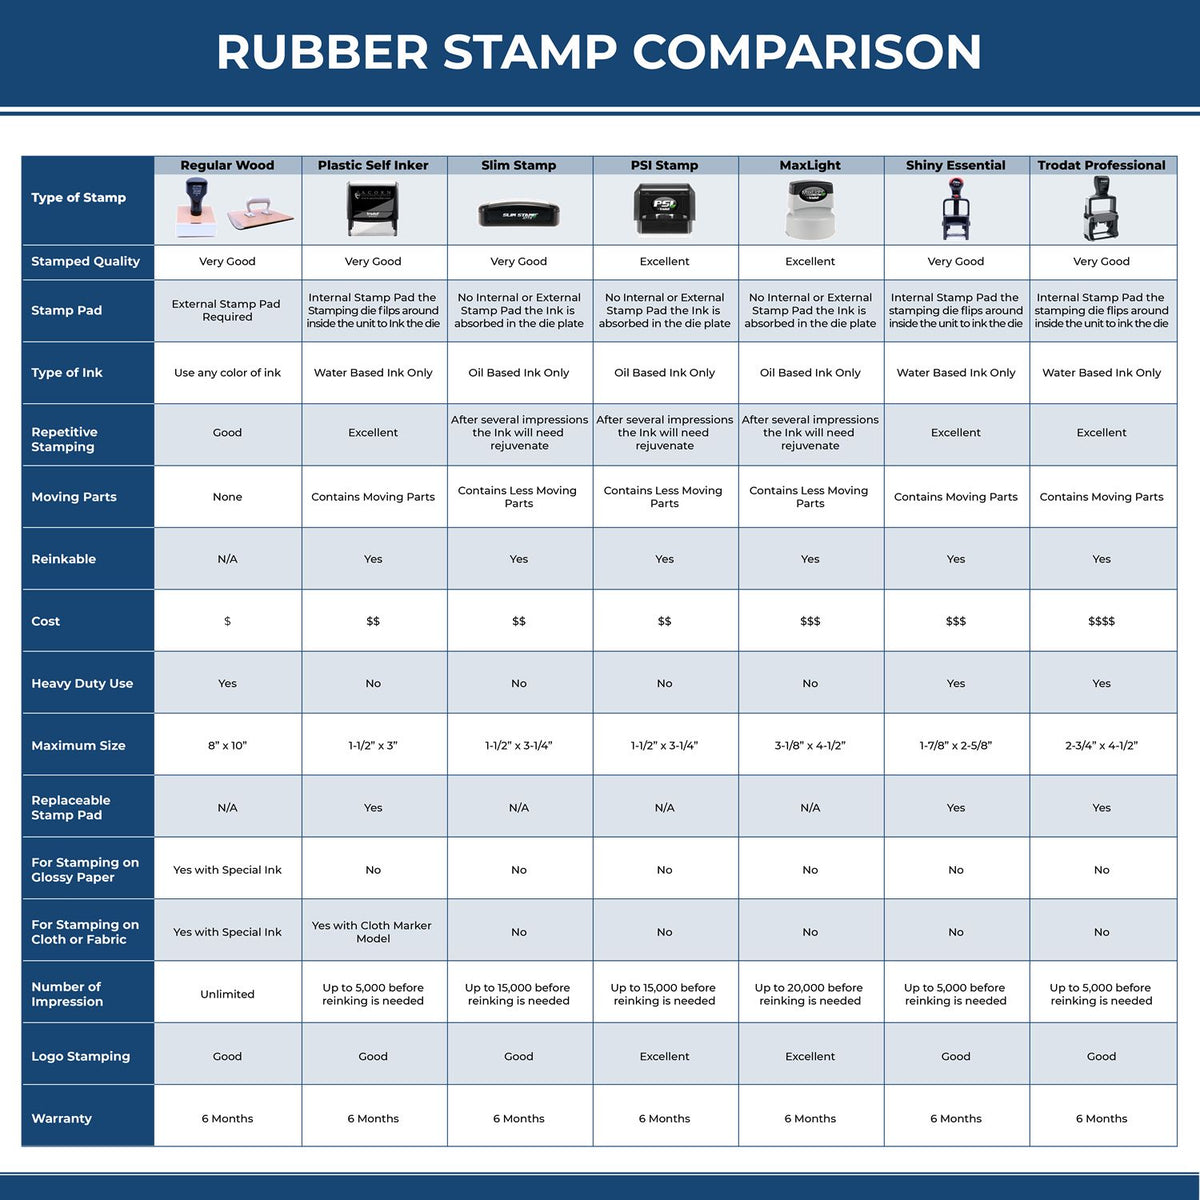 A comparison chart for the different types of mount models available for the Slim Pre-Inked Rhode Island Landscape Architect Seal Stamp.